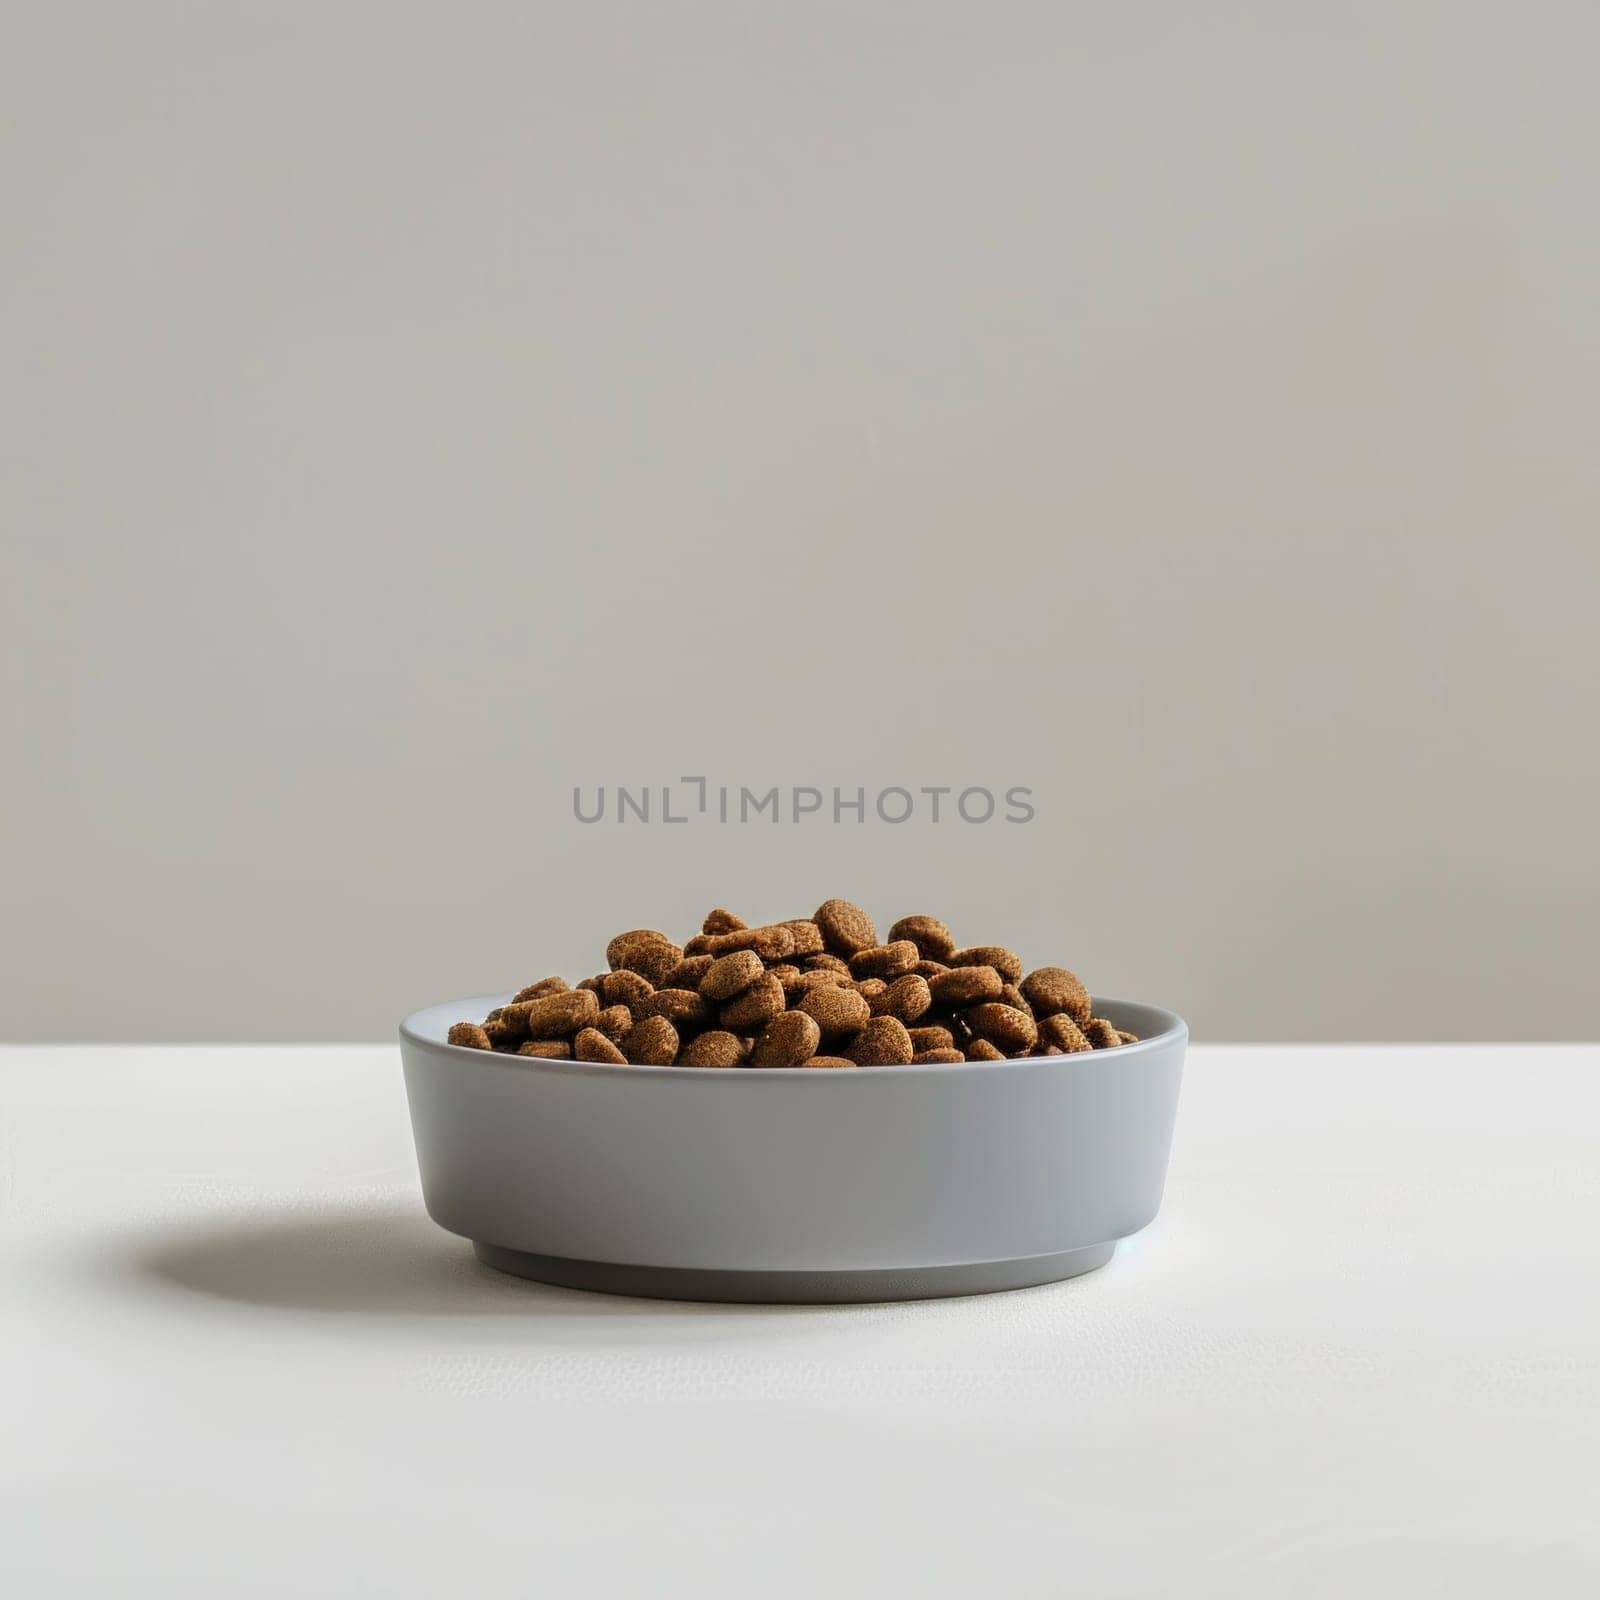 Minimalistic photo of a bowl of dog food on white background by papatonic